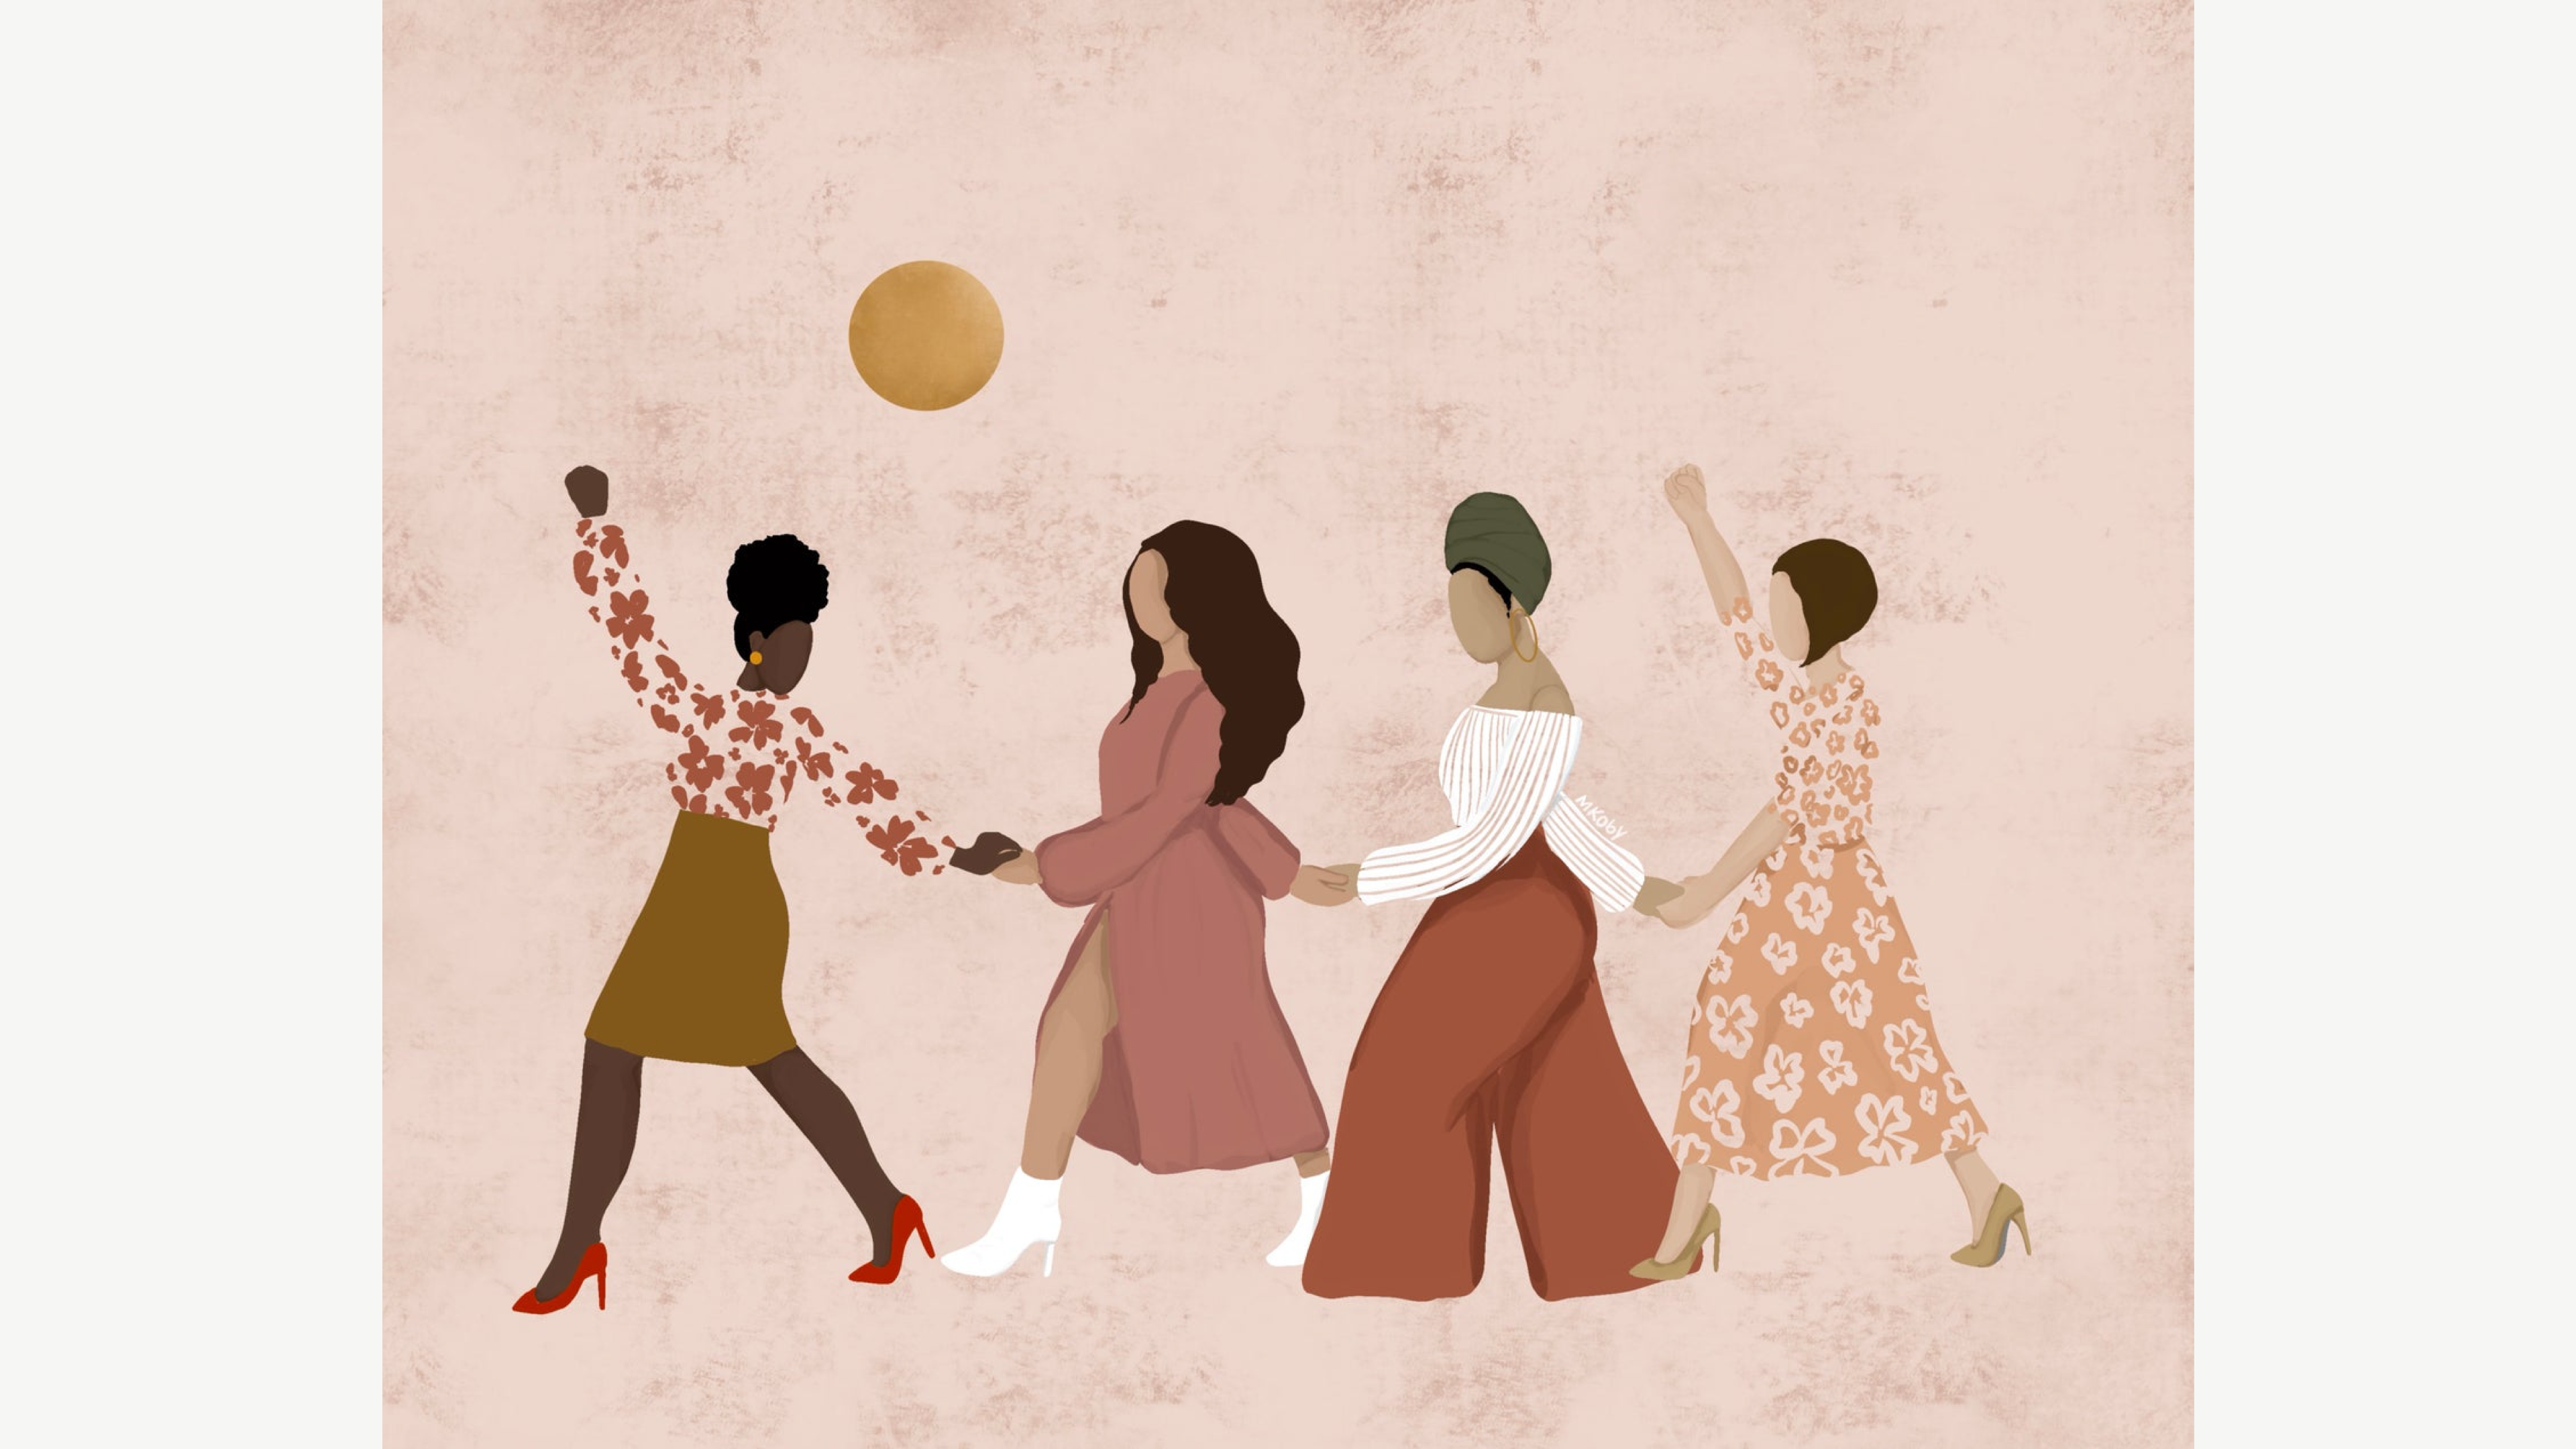 progress print meant to symbolize unity, four women holding hands marching